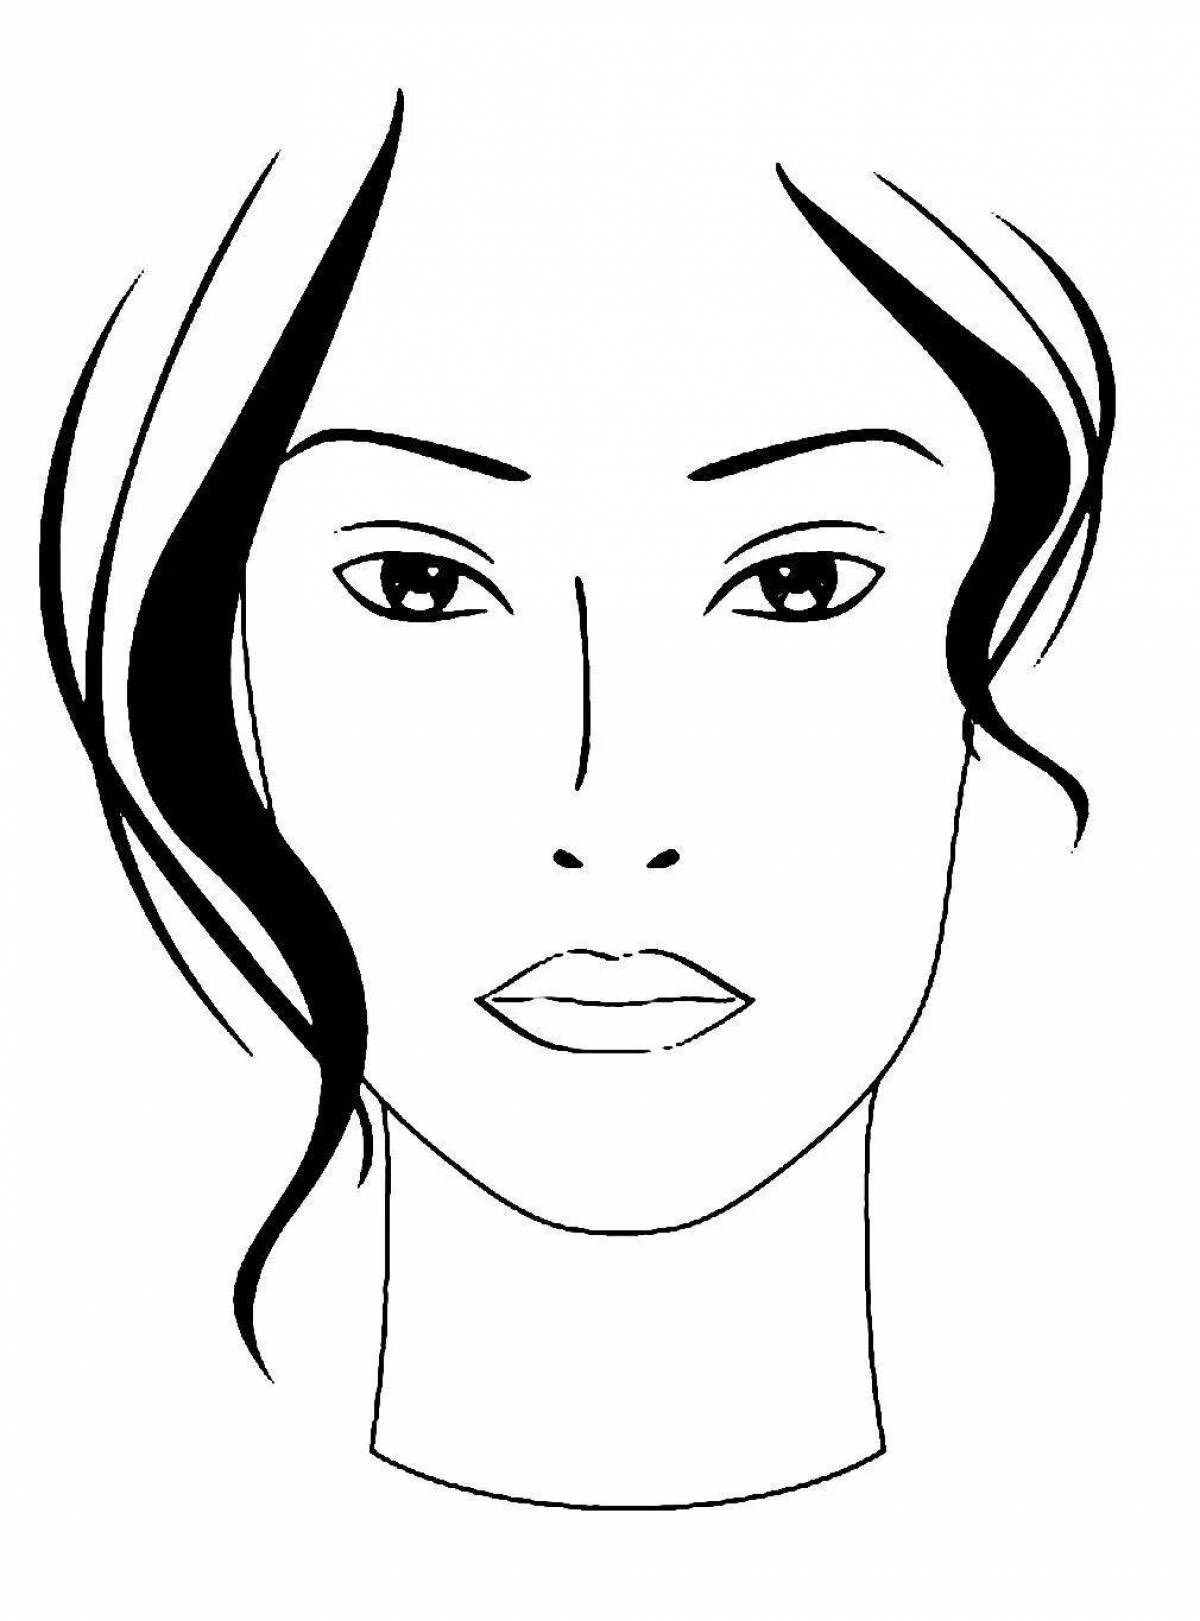 Shining makeup female face coloring page